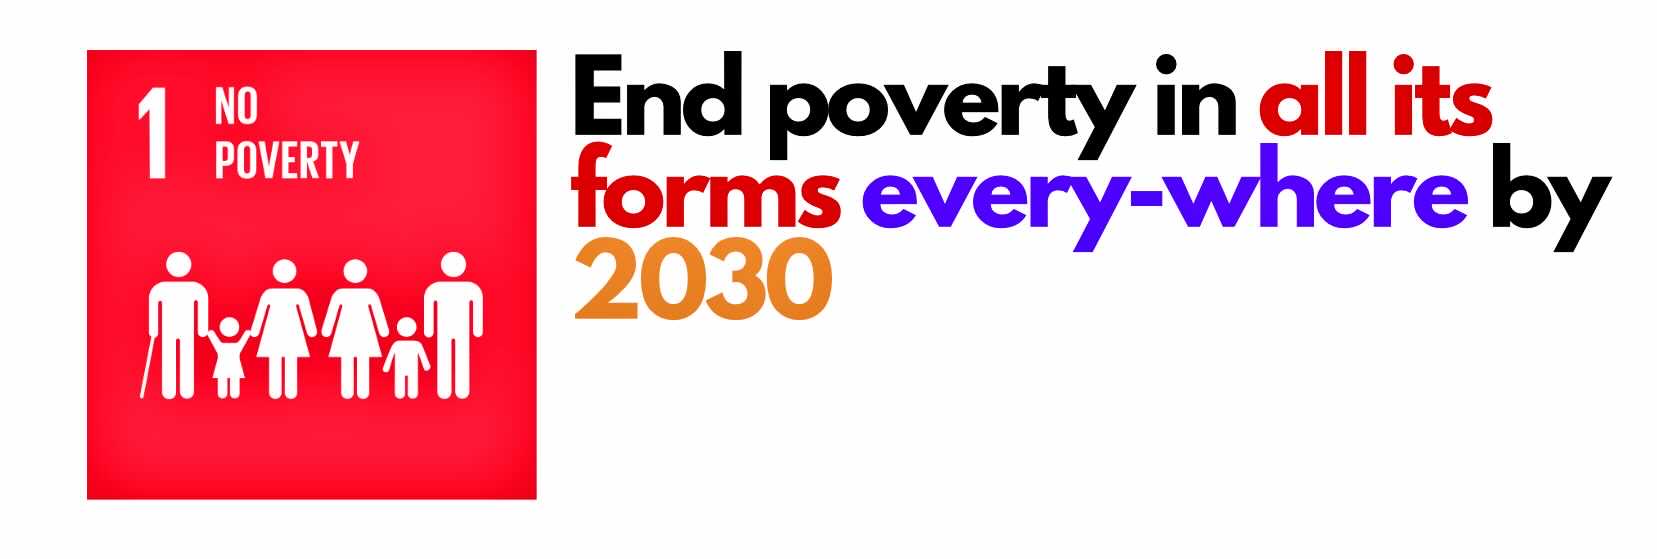 SDG 1: End Poverty in all its forms everywhere by 2030